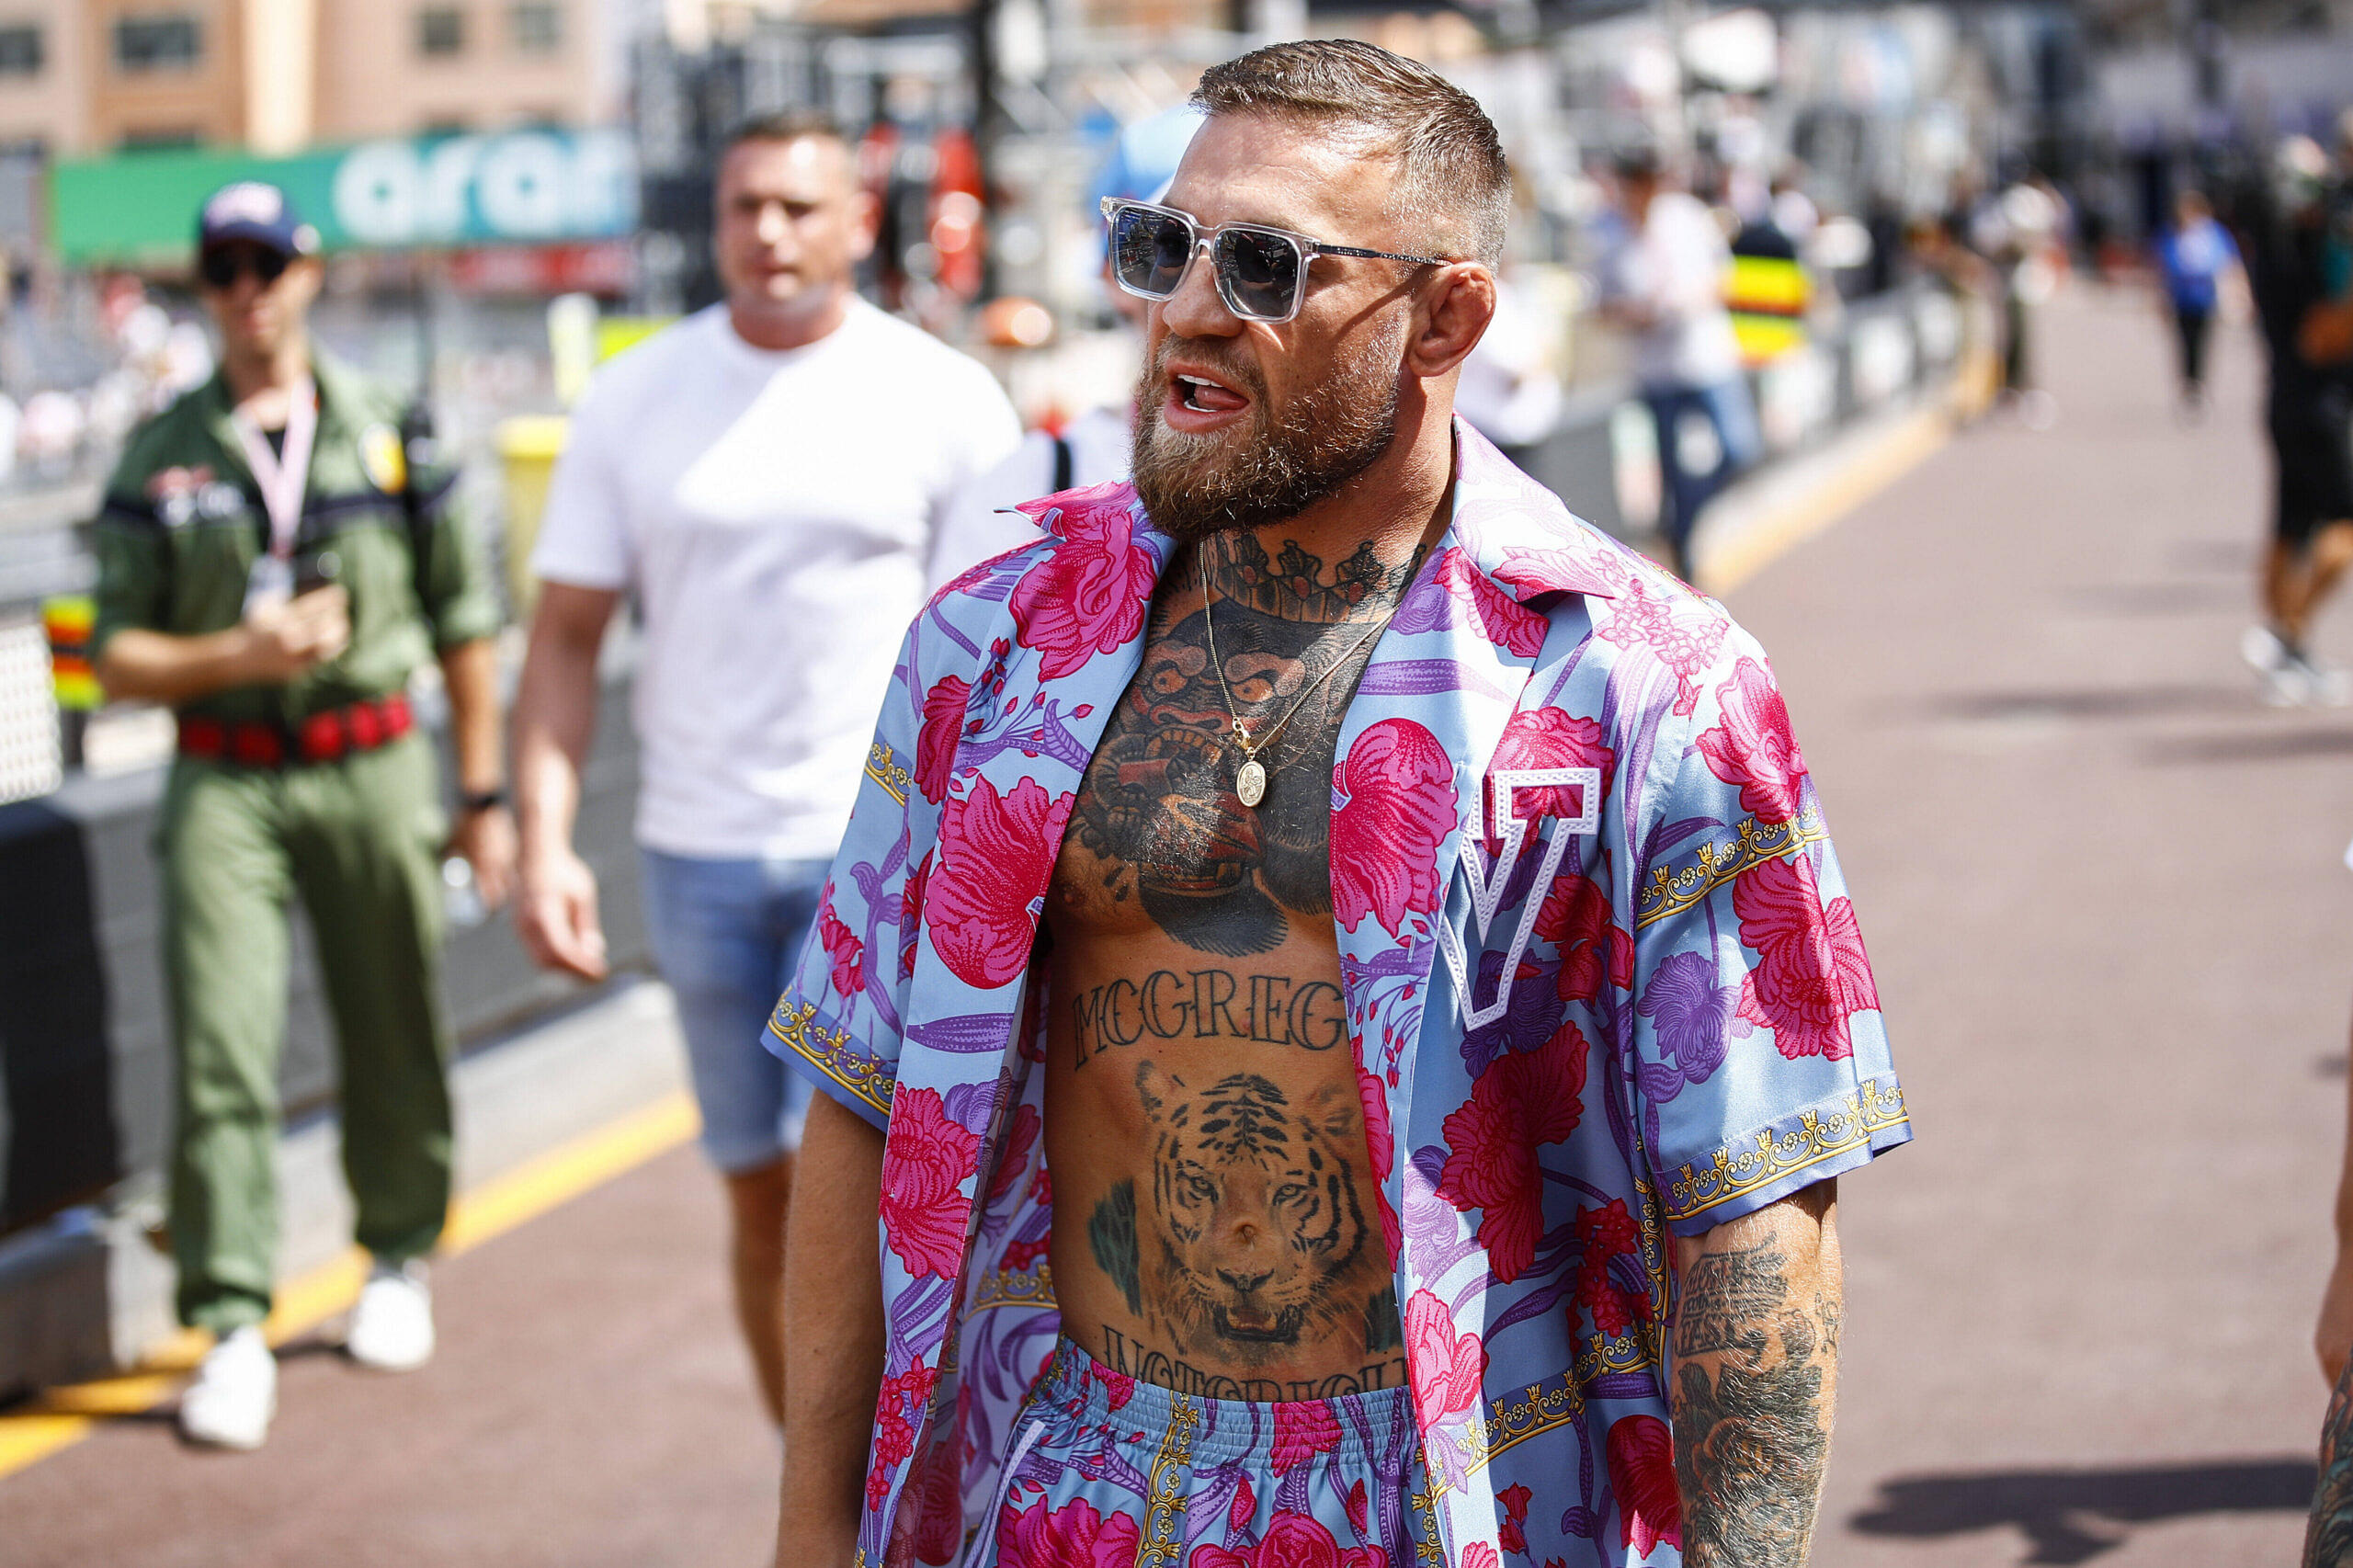 Despite 8 Losses, $200,000,000 Man Conor McGregor Spends $8000 on His TUF Team, Fans React: “Forced to Drink His…”